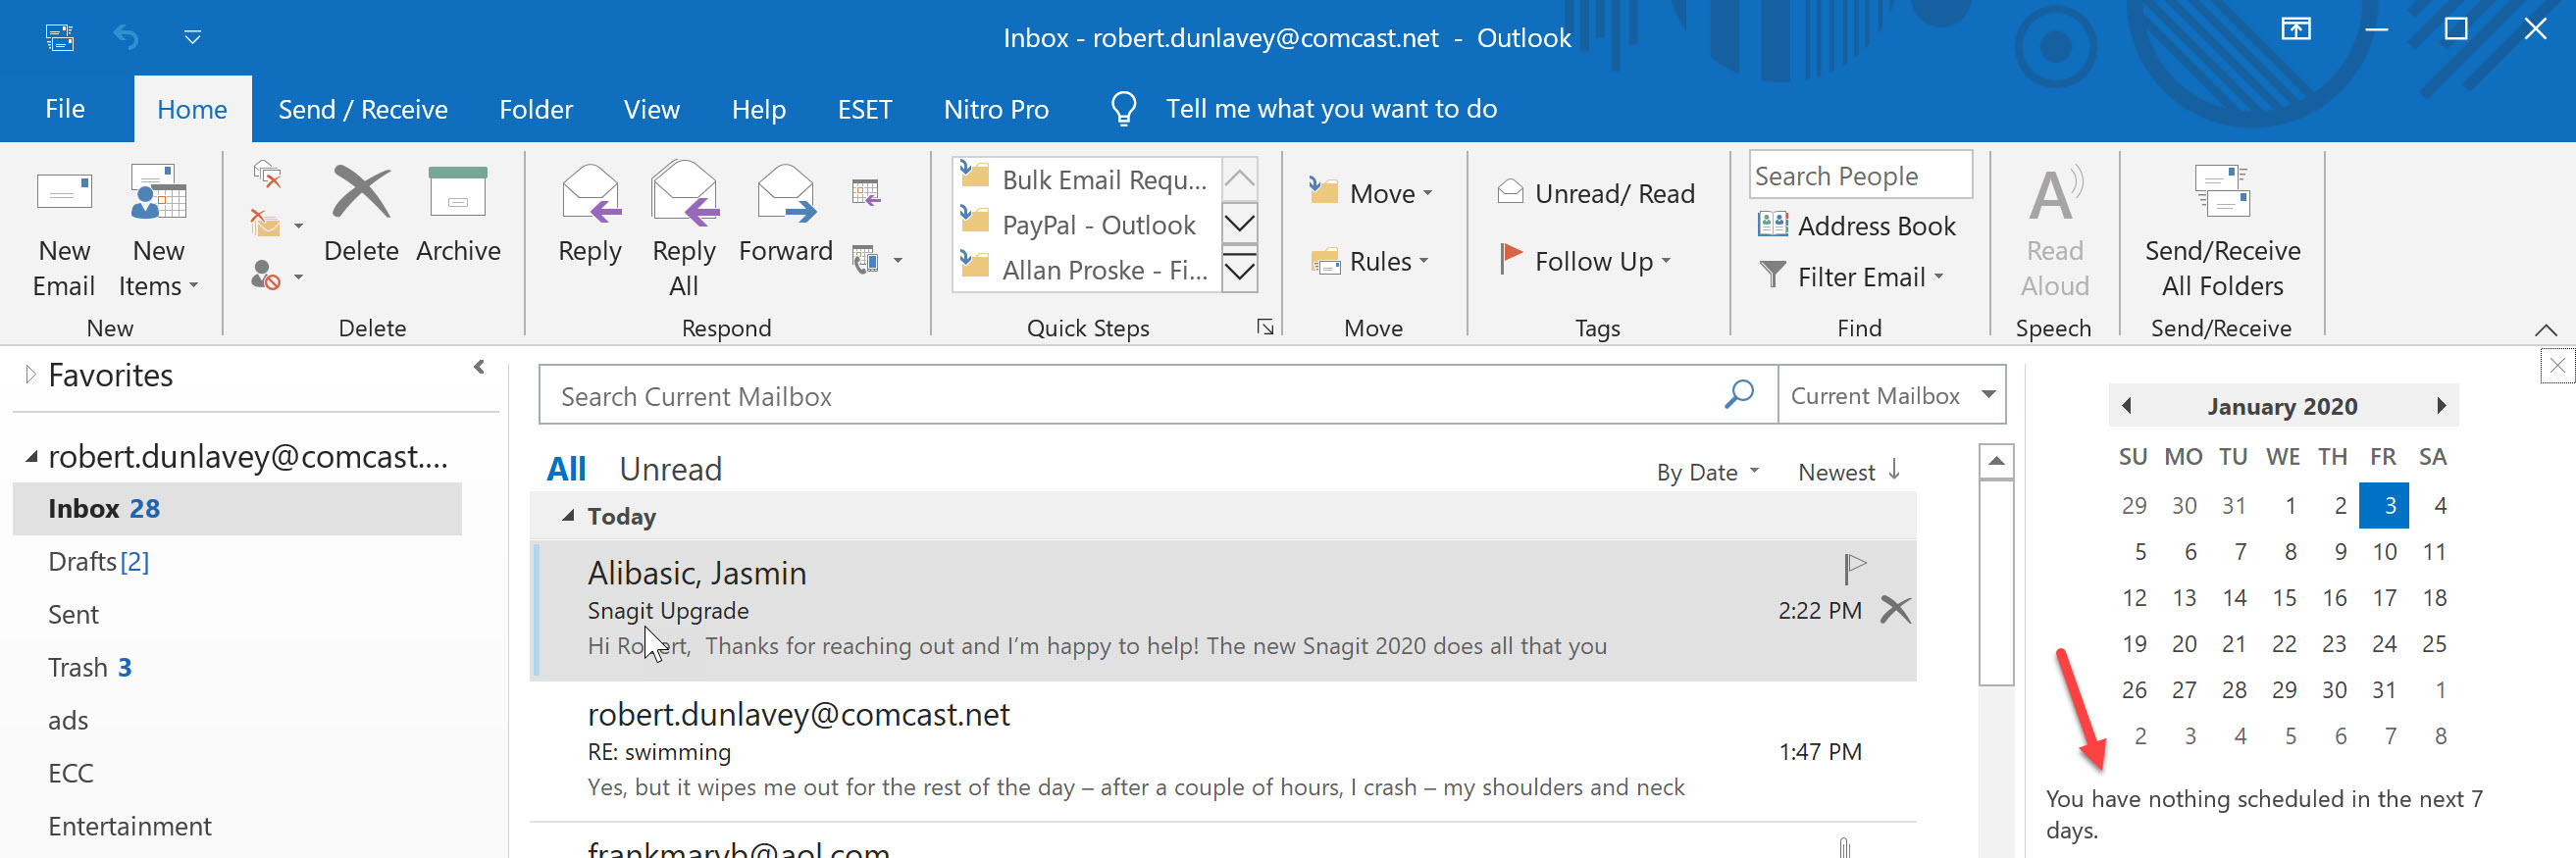 Outlook 2016 Not Syncing Calendars in "Mail" View vs. Microsoft Community